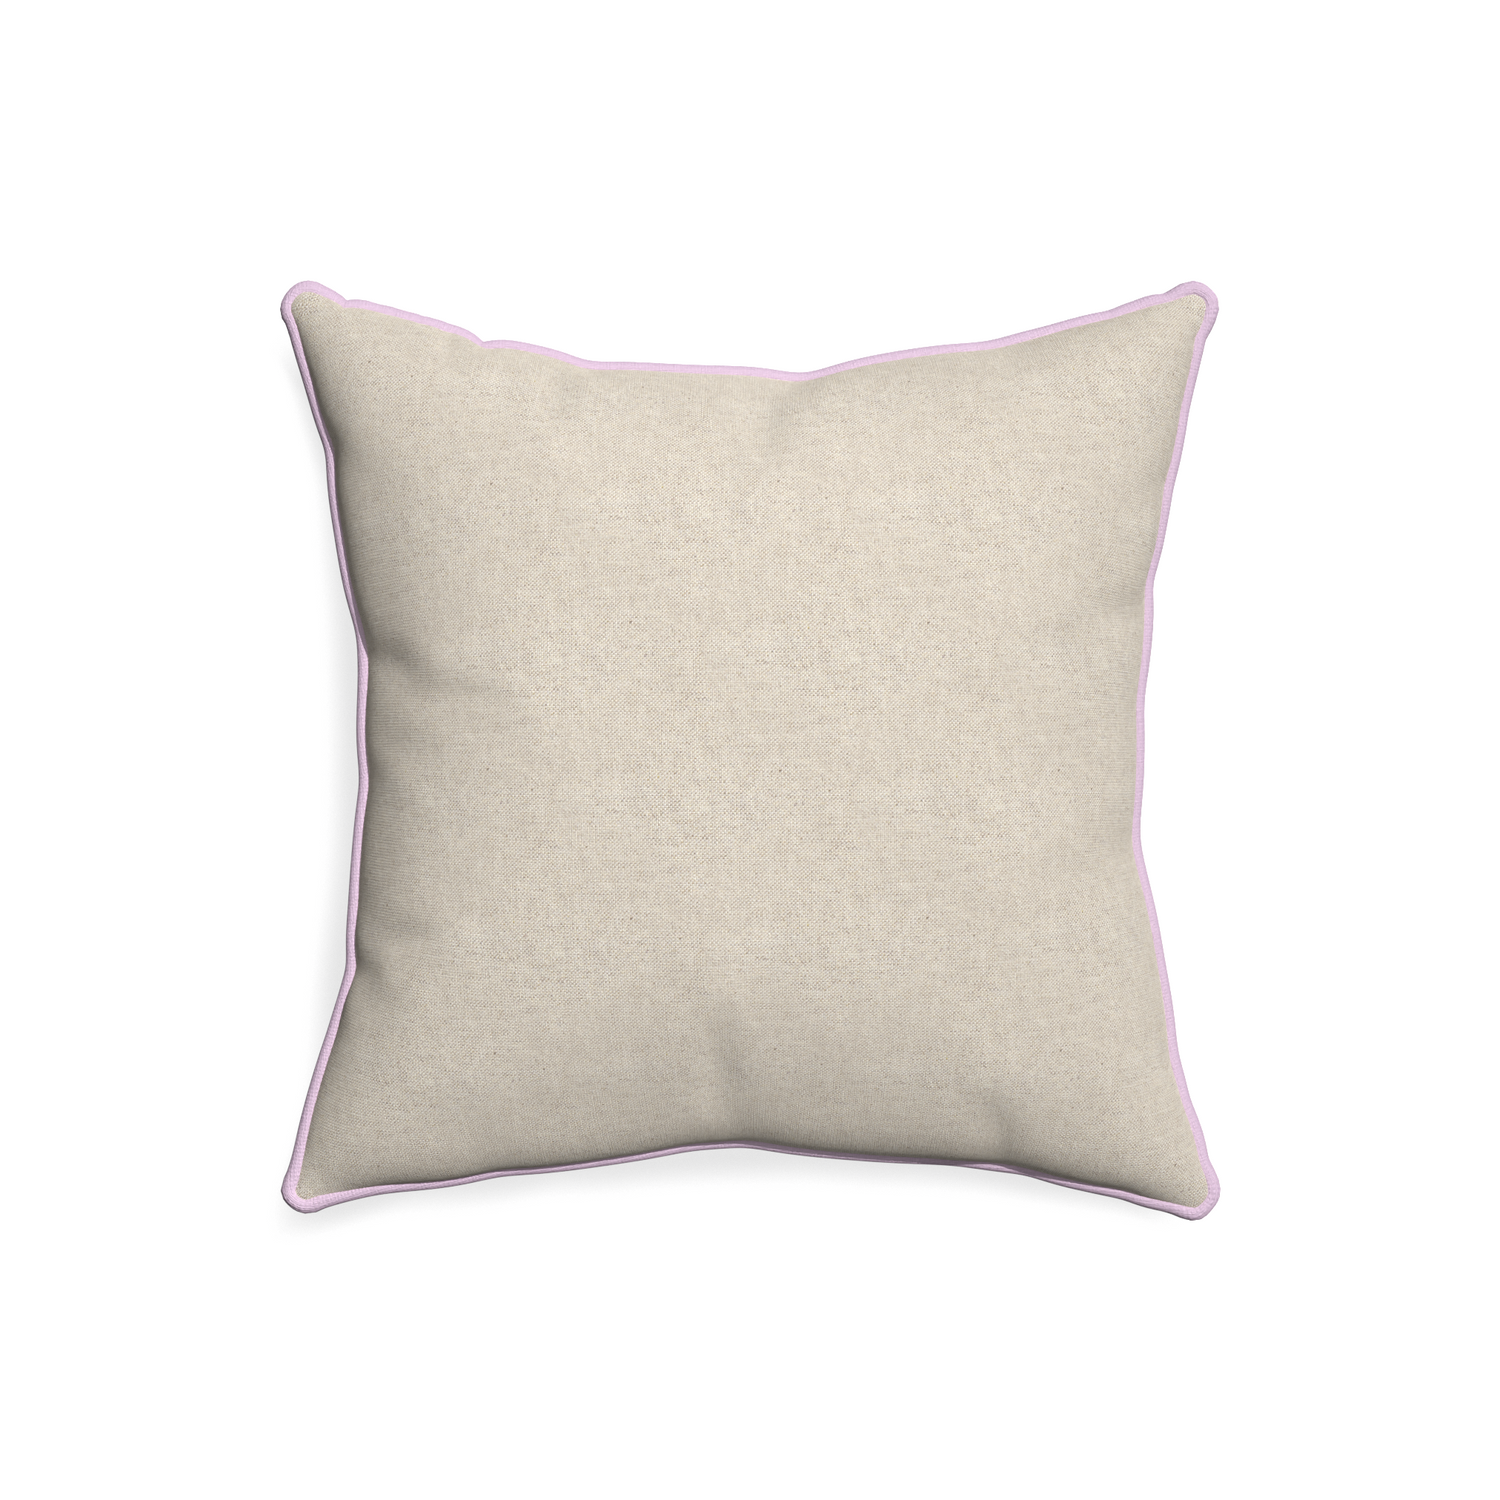 20-square oat custom pillow with l piping on white background